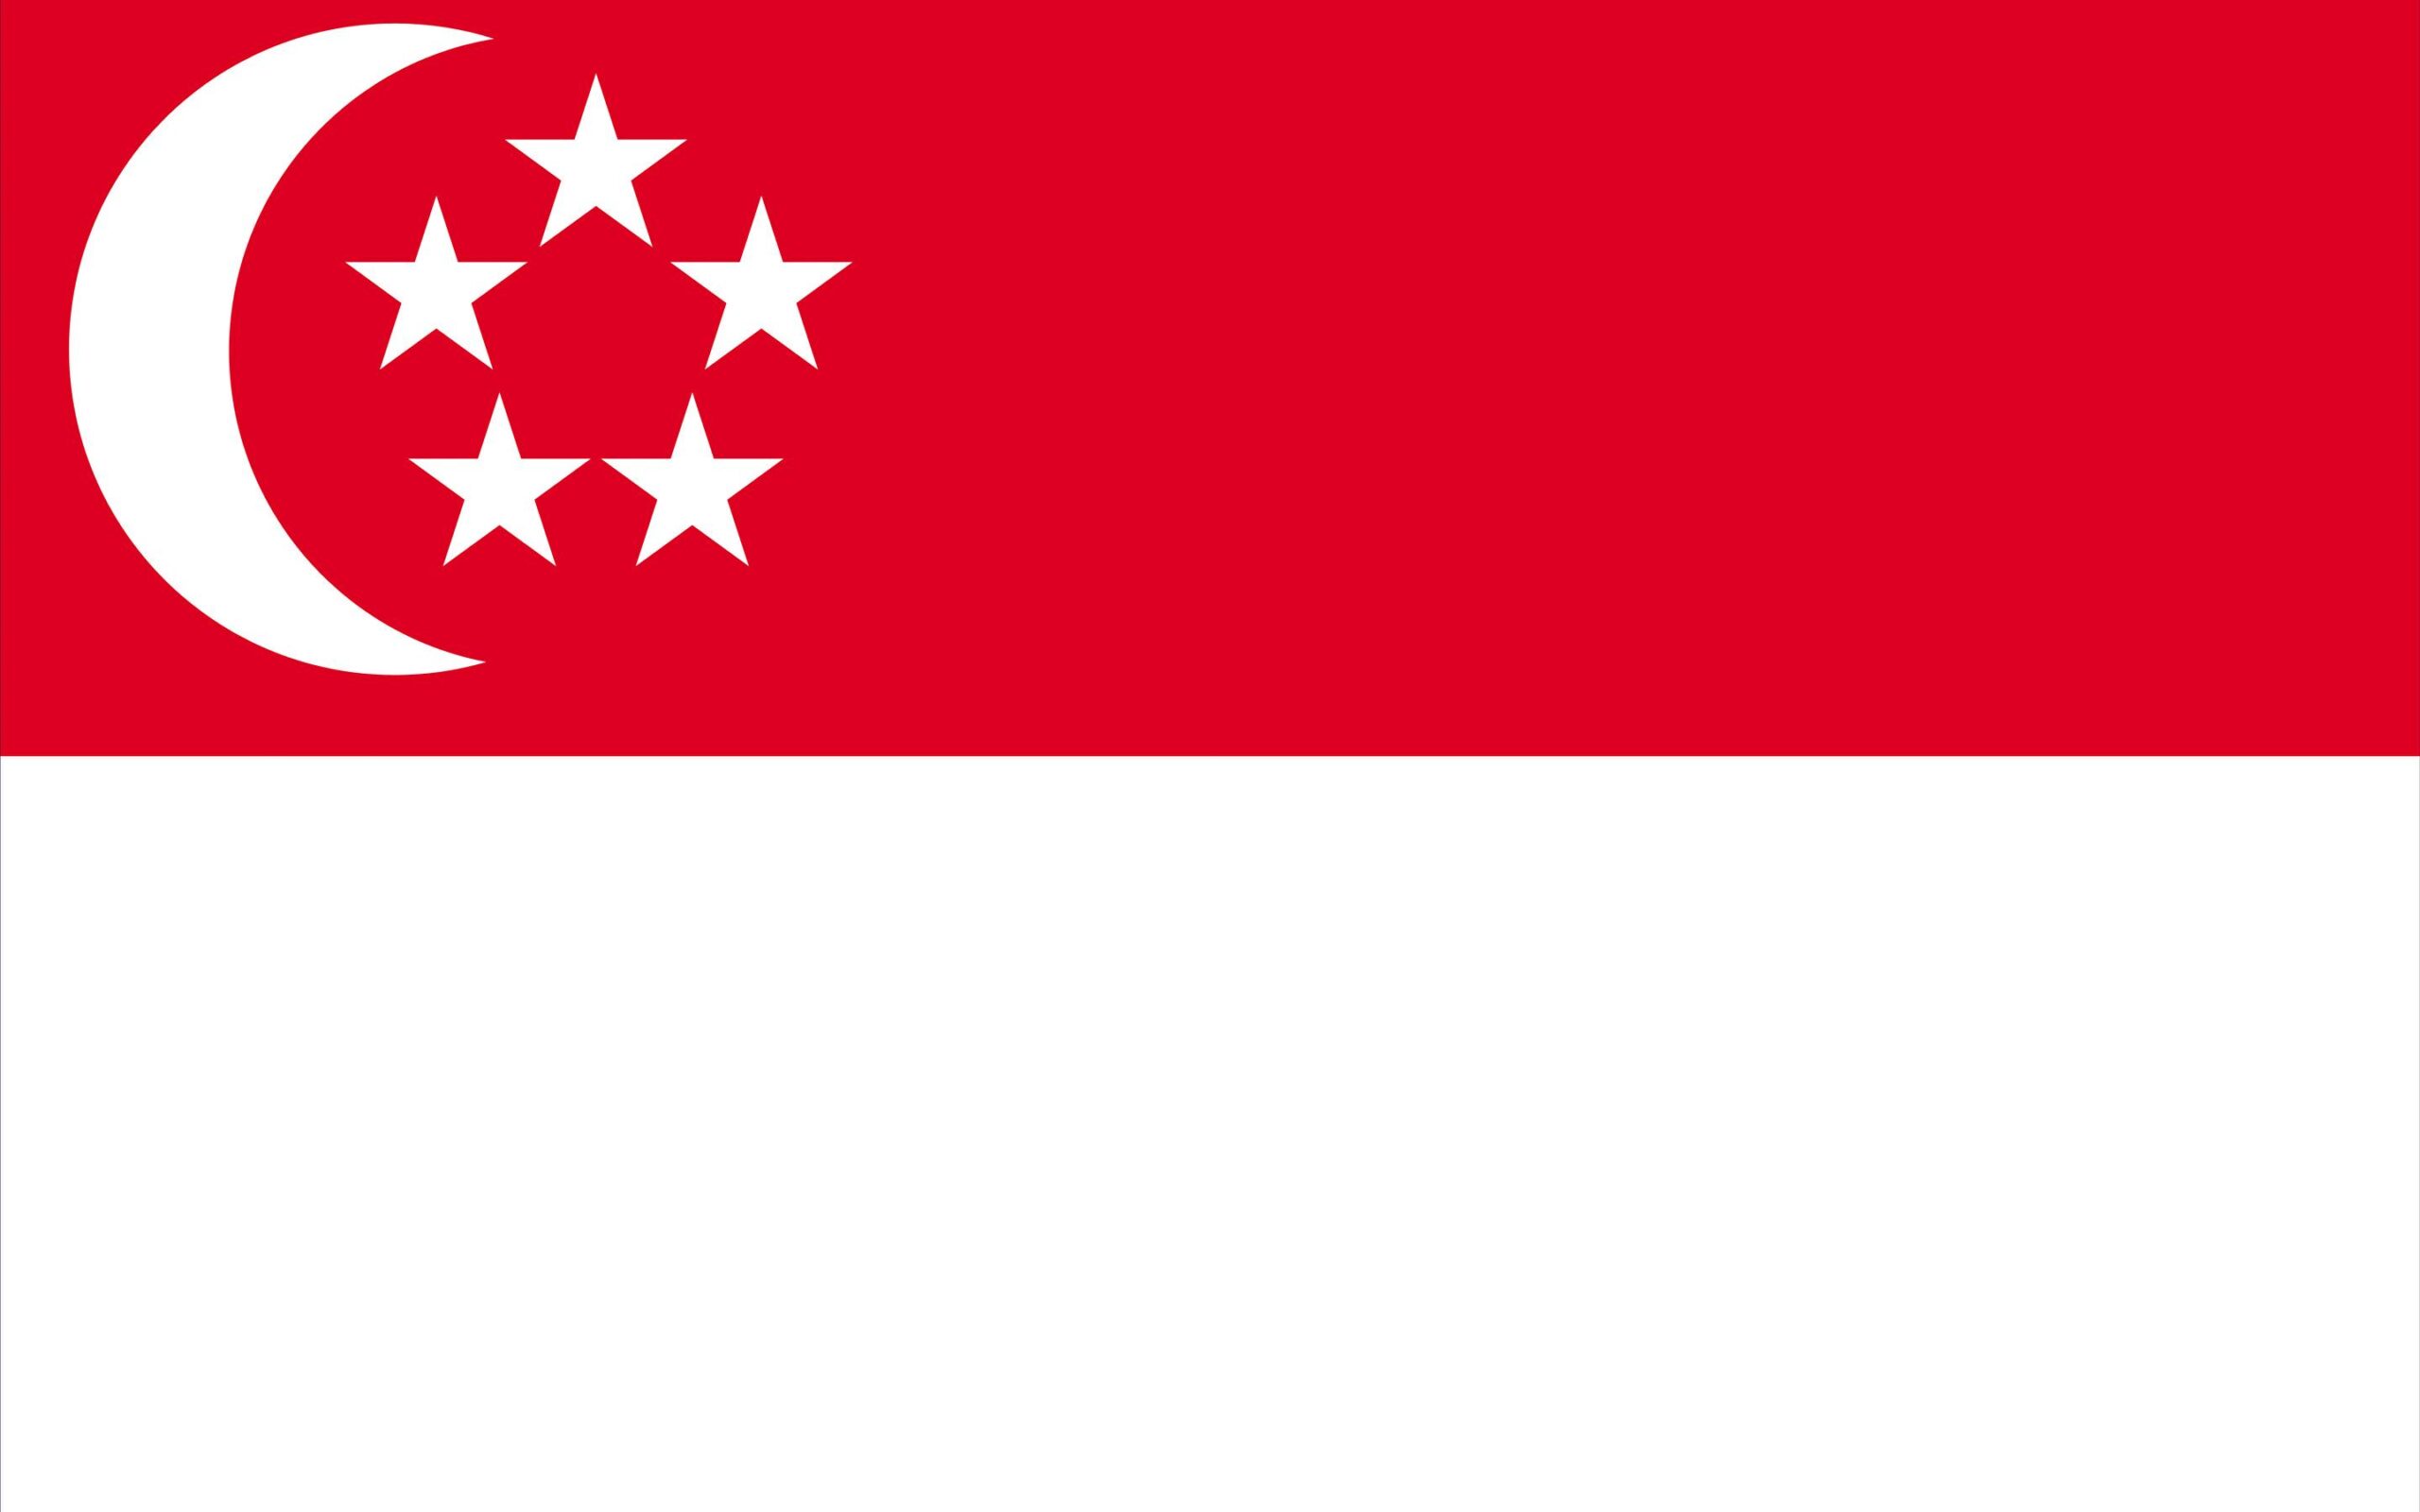 Wallpapers Singapore Flag